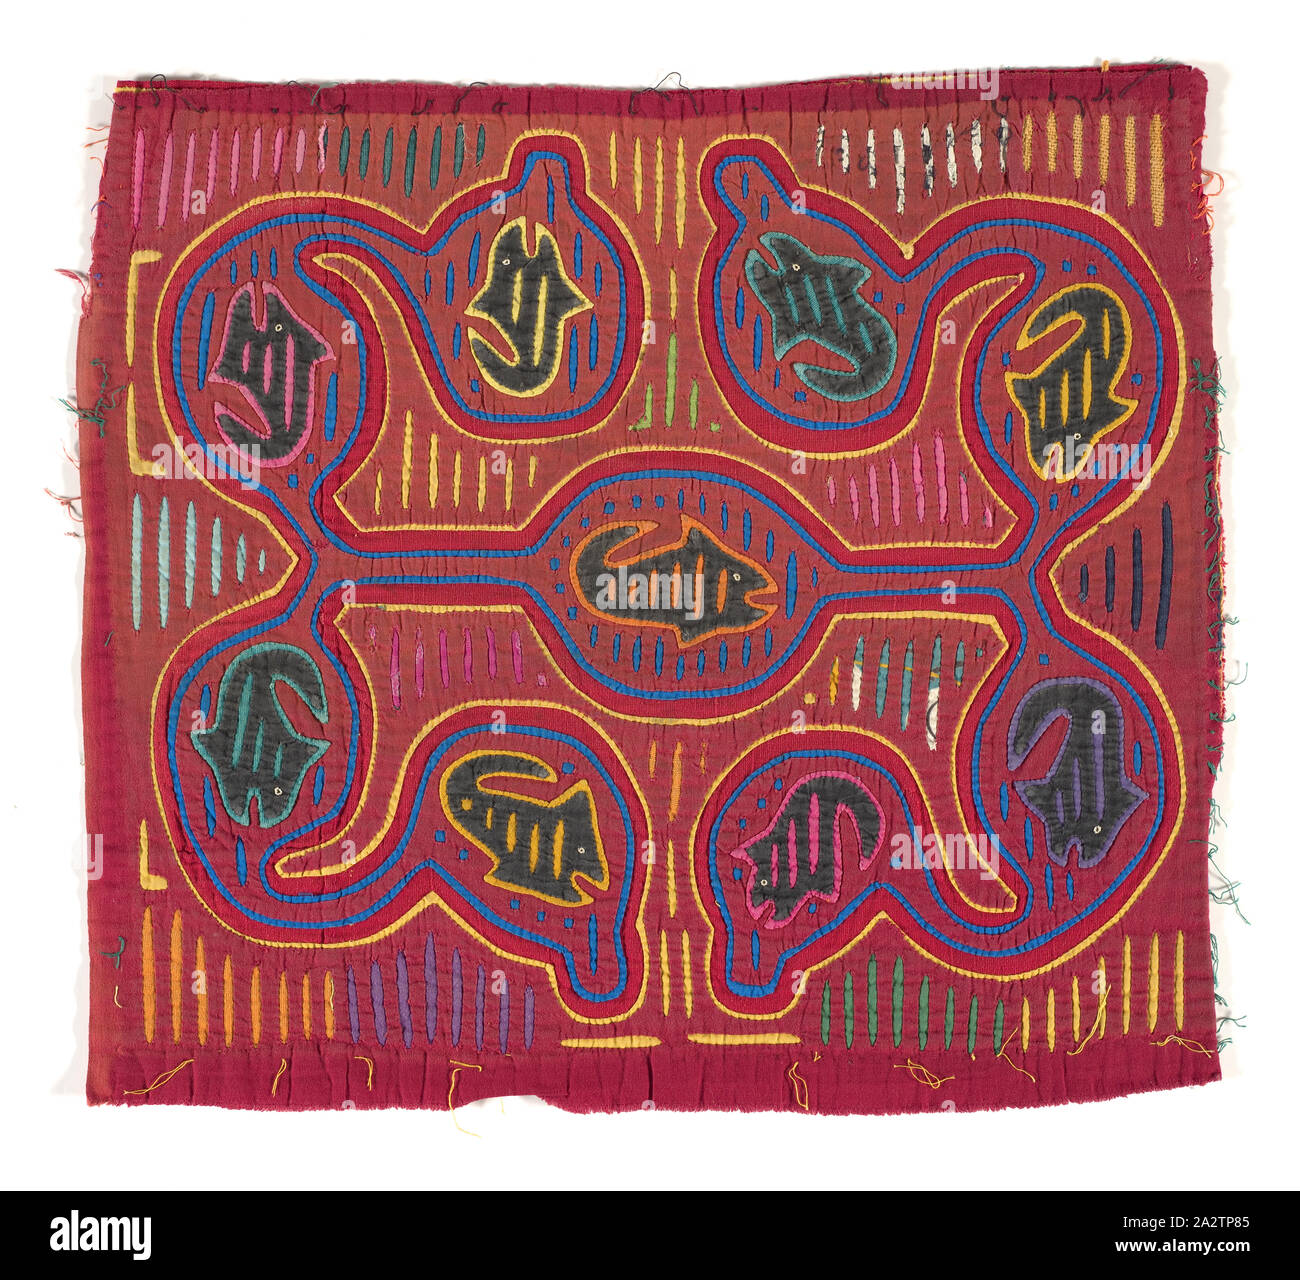 shirt panel (mola), Kuna people, about 1950s, appliqued cotton, 15-1/2 x 17-3/16 in., Textile and Fashion Arts Stock Photo